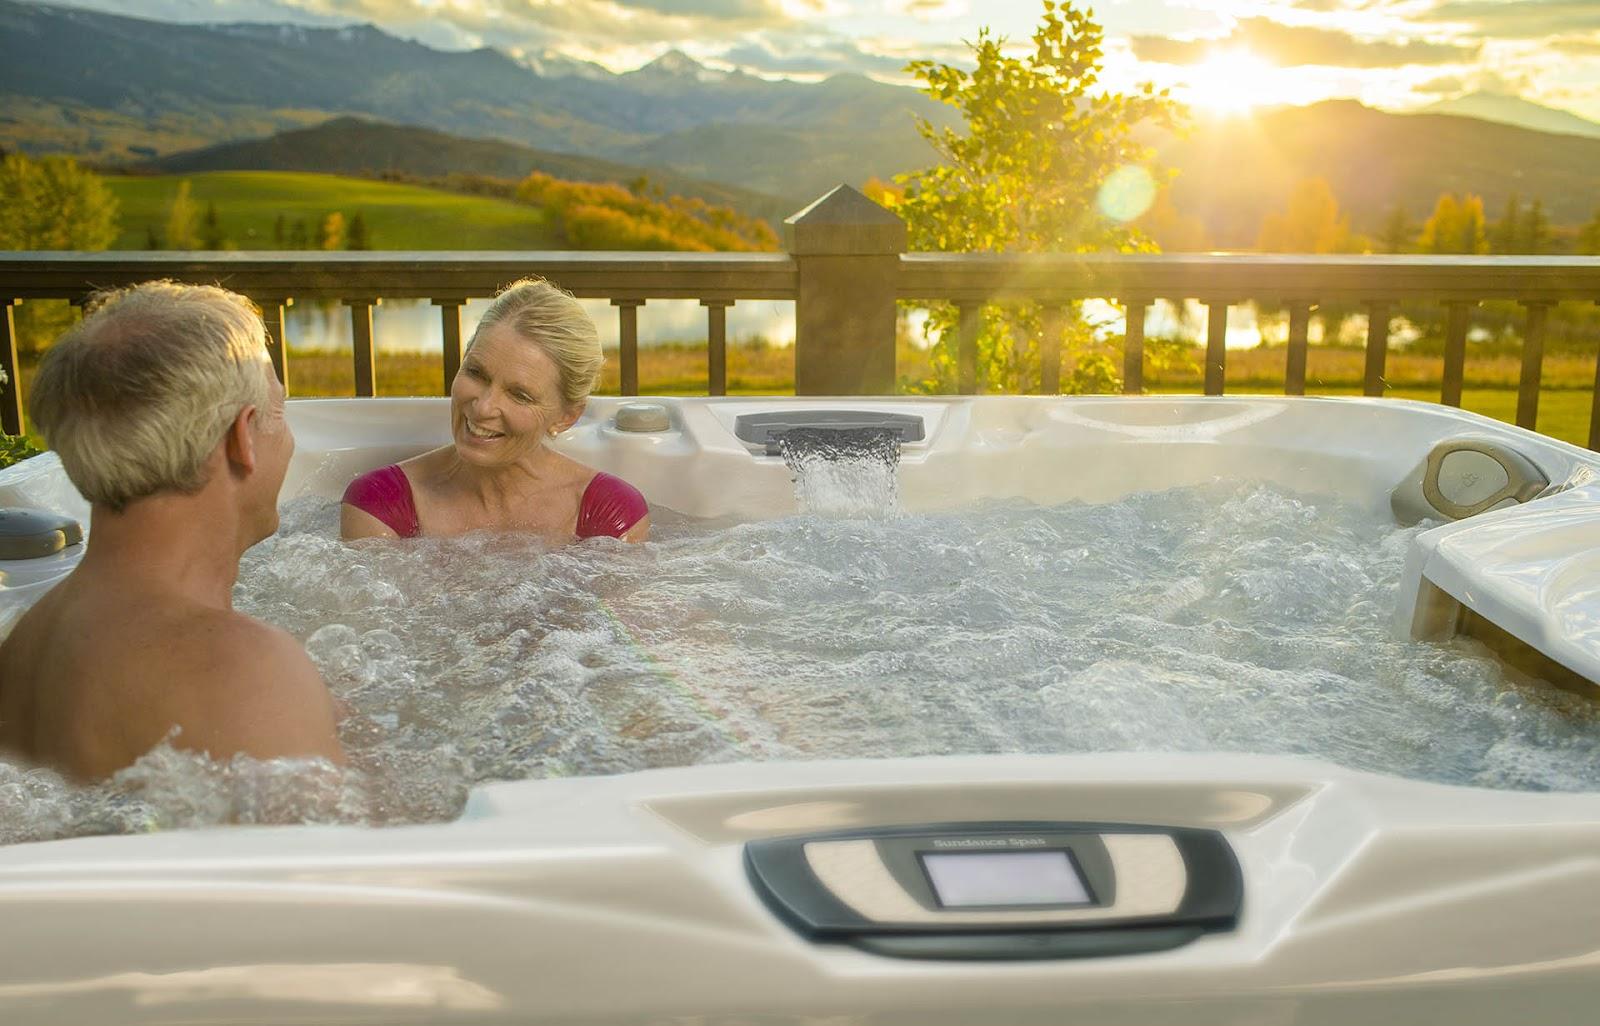 How to Plan a Special Hot Tub Valentine's Date Night